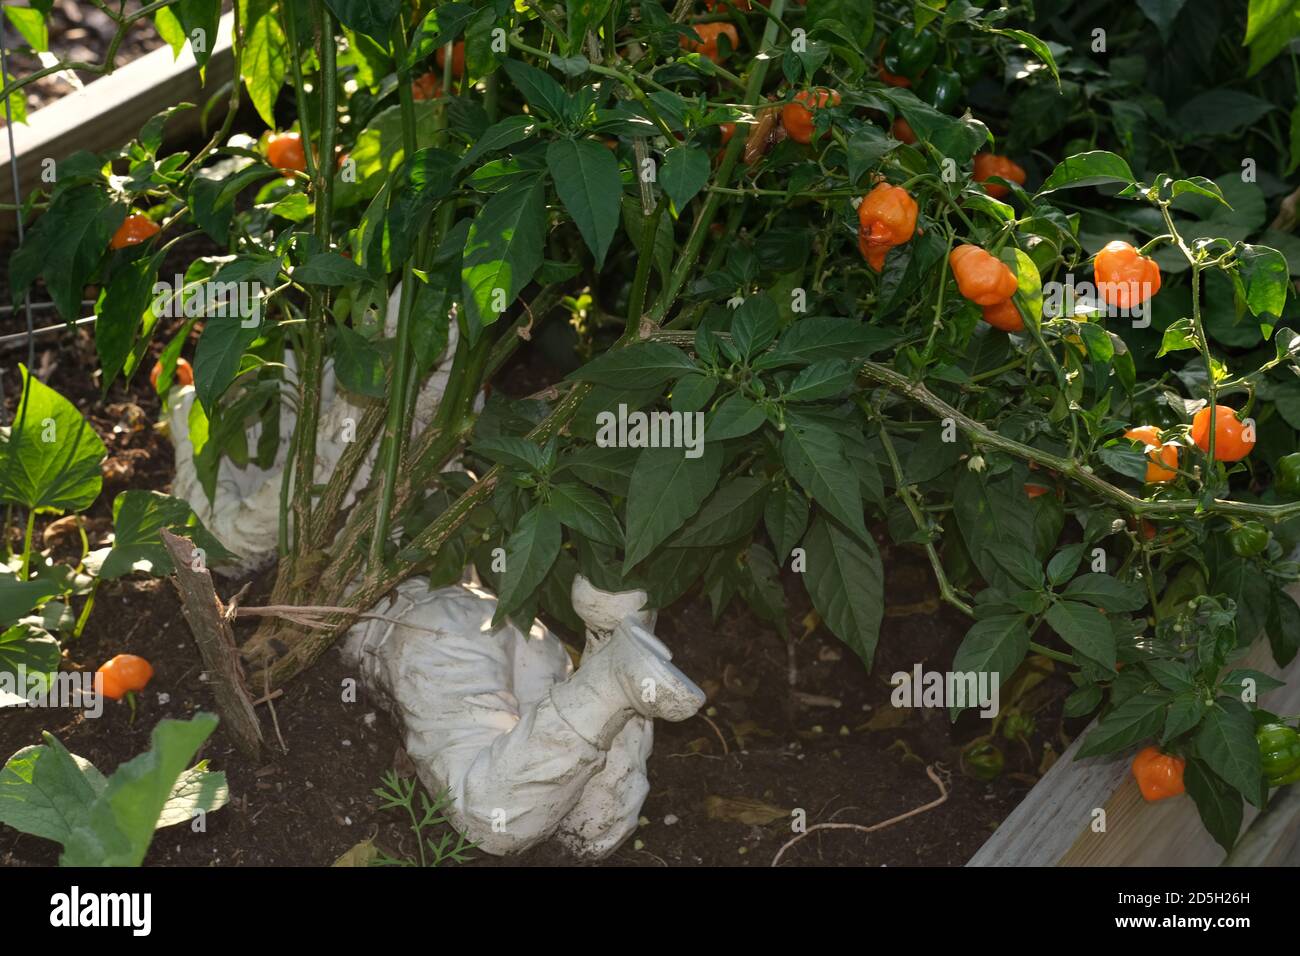 Urban Garden with Vegetables, Flowers, Halloween, for a Variety of Images and Decorations. Stock Photo